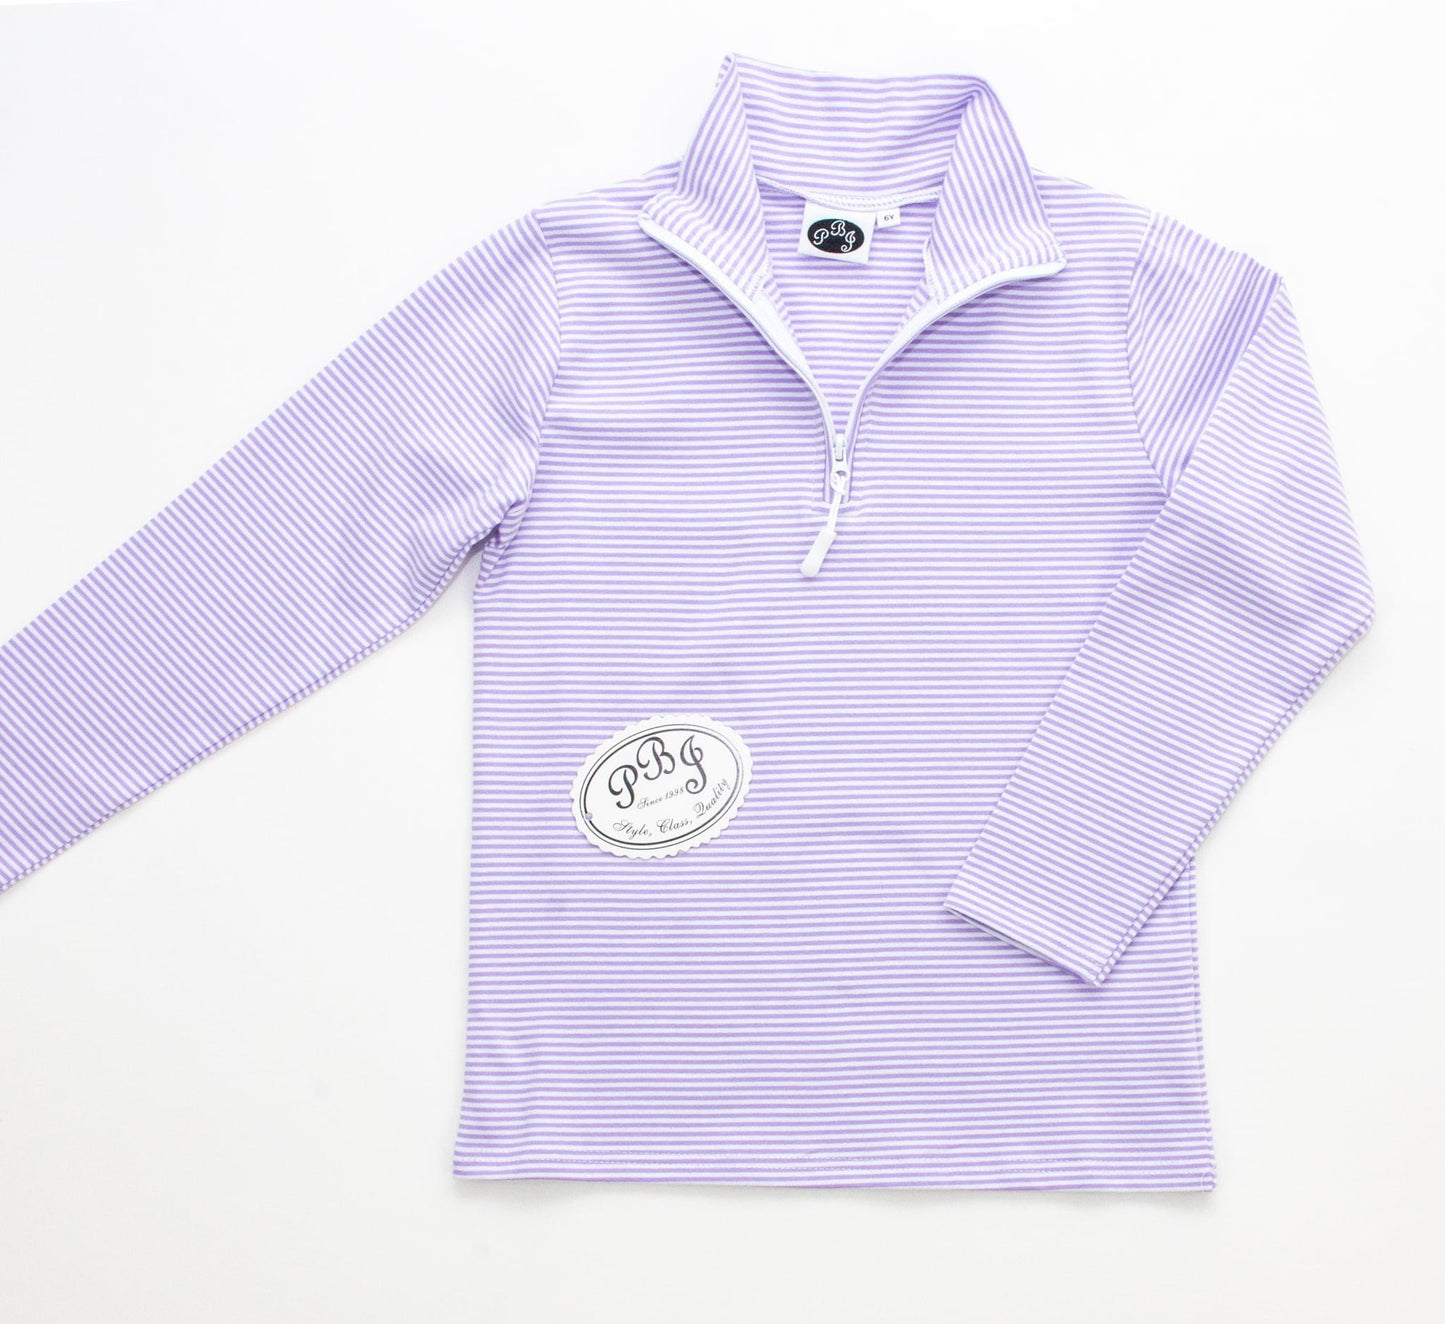 1/4 zipped pullover (pink, lilac and chocolate)